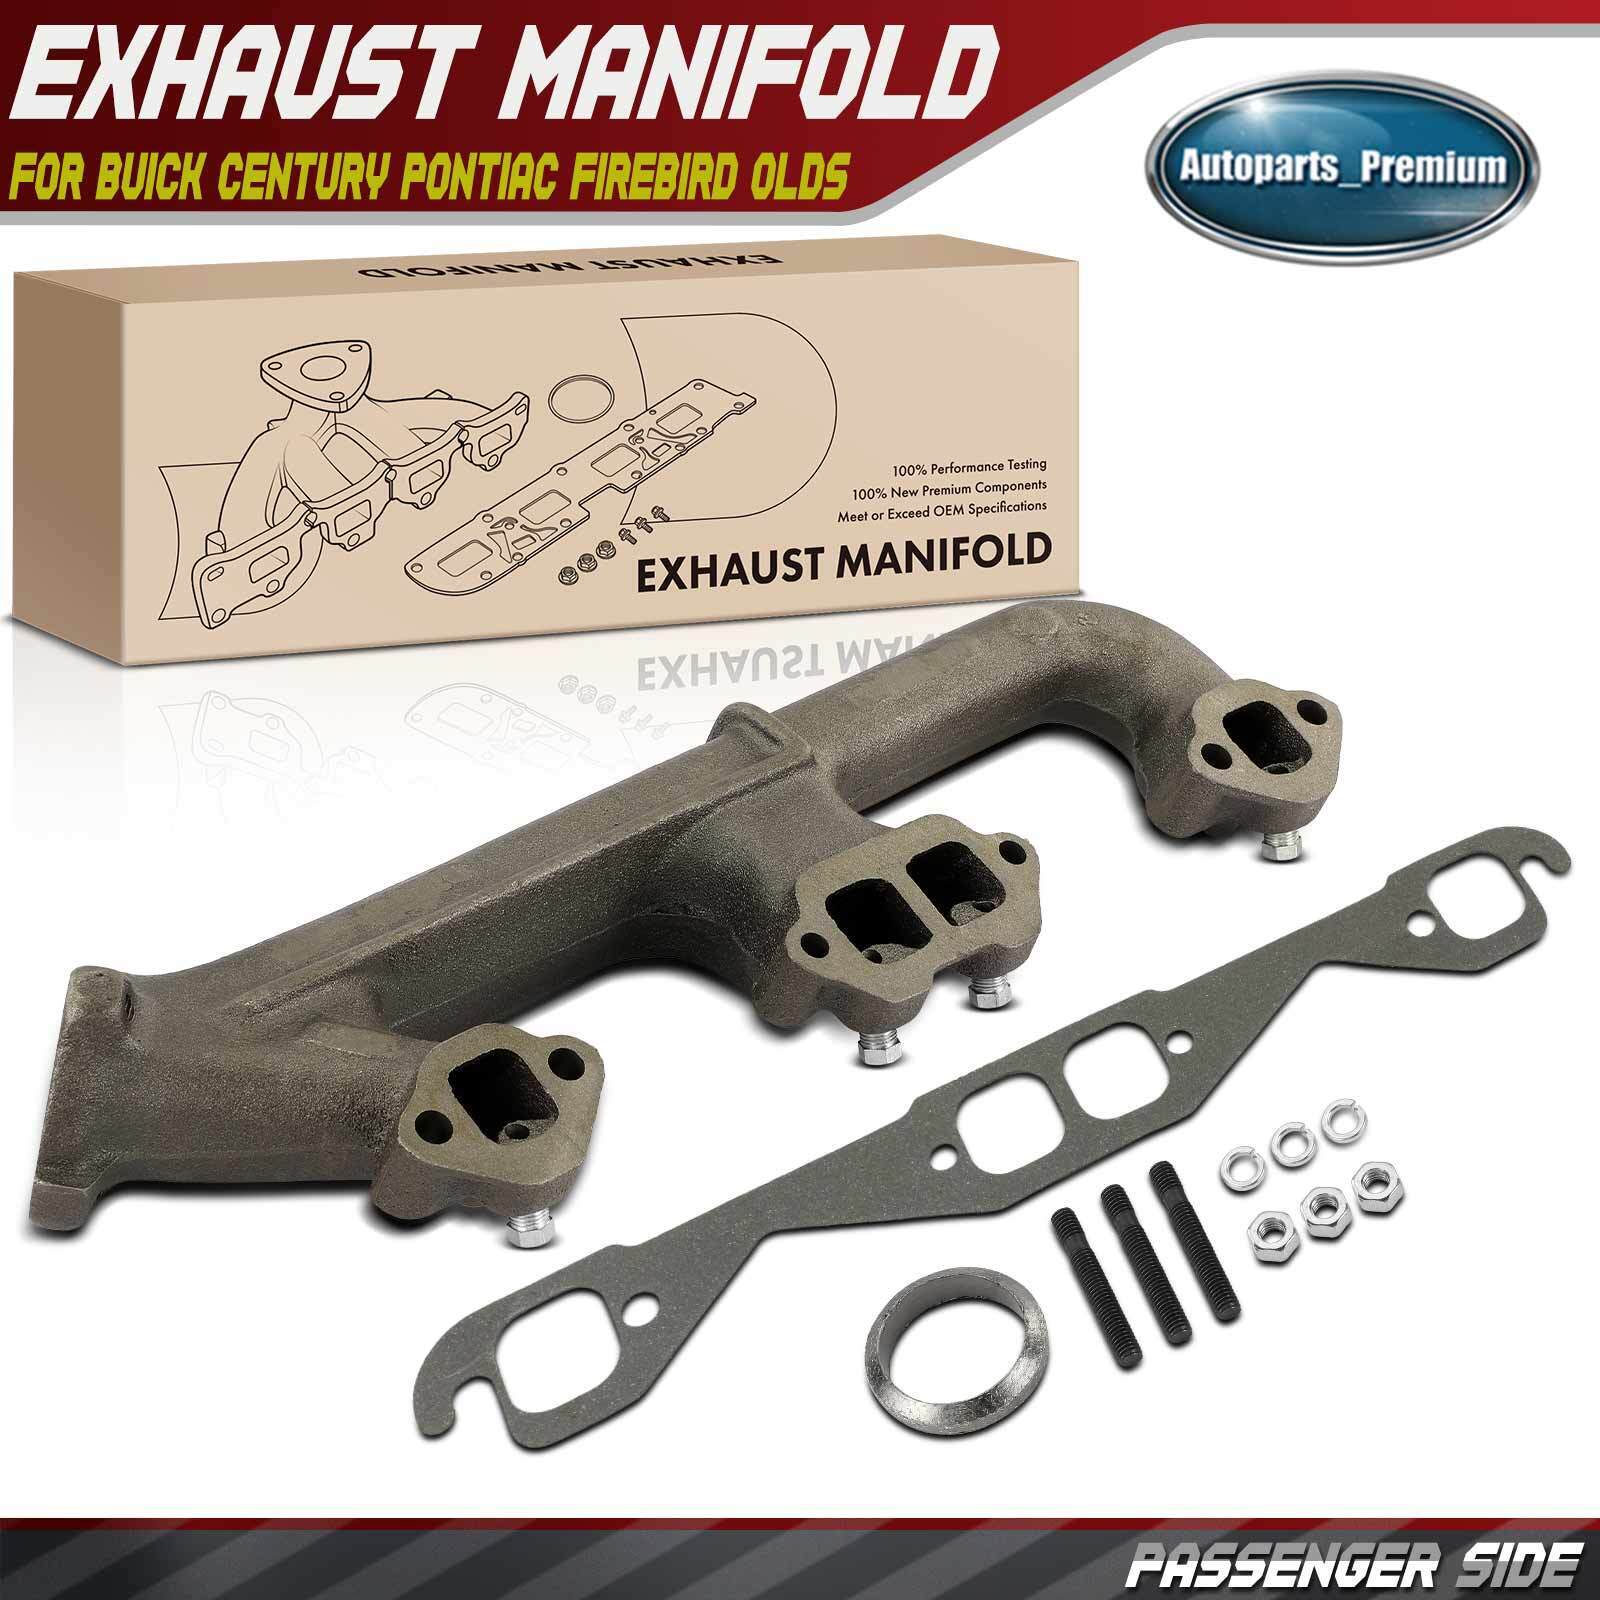 Right Exhaust Manifold w/ Gasket for Buick Century Pontiac Firebird Olds Chevy